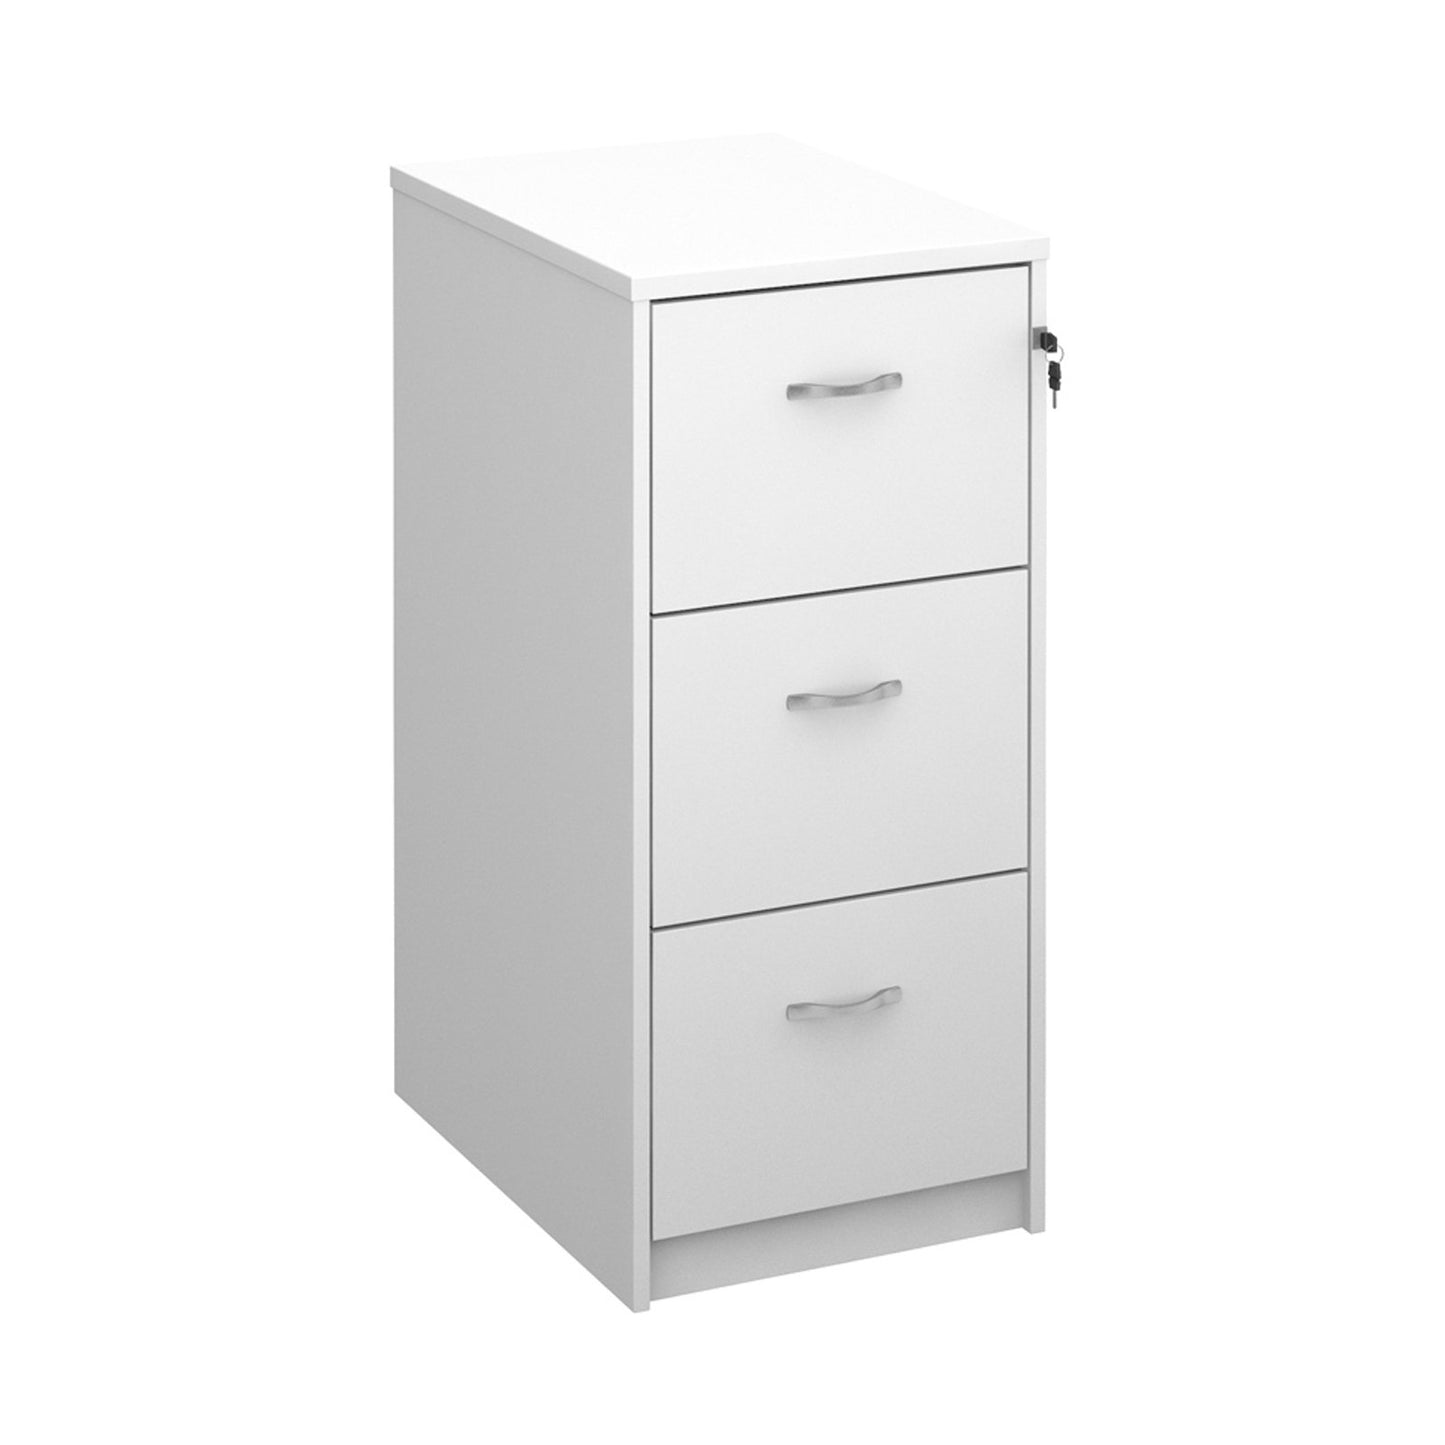 Wooden Filing Cabinet With Silver Handles - 2 Drawer - White